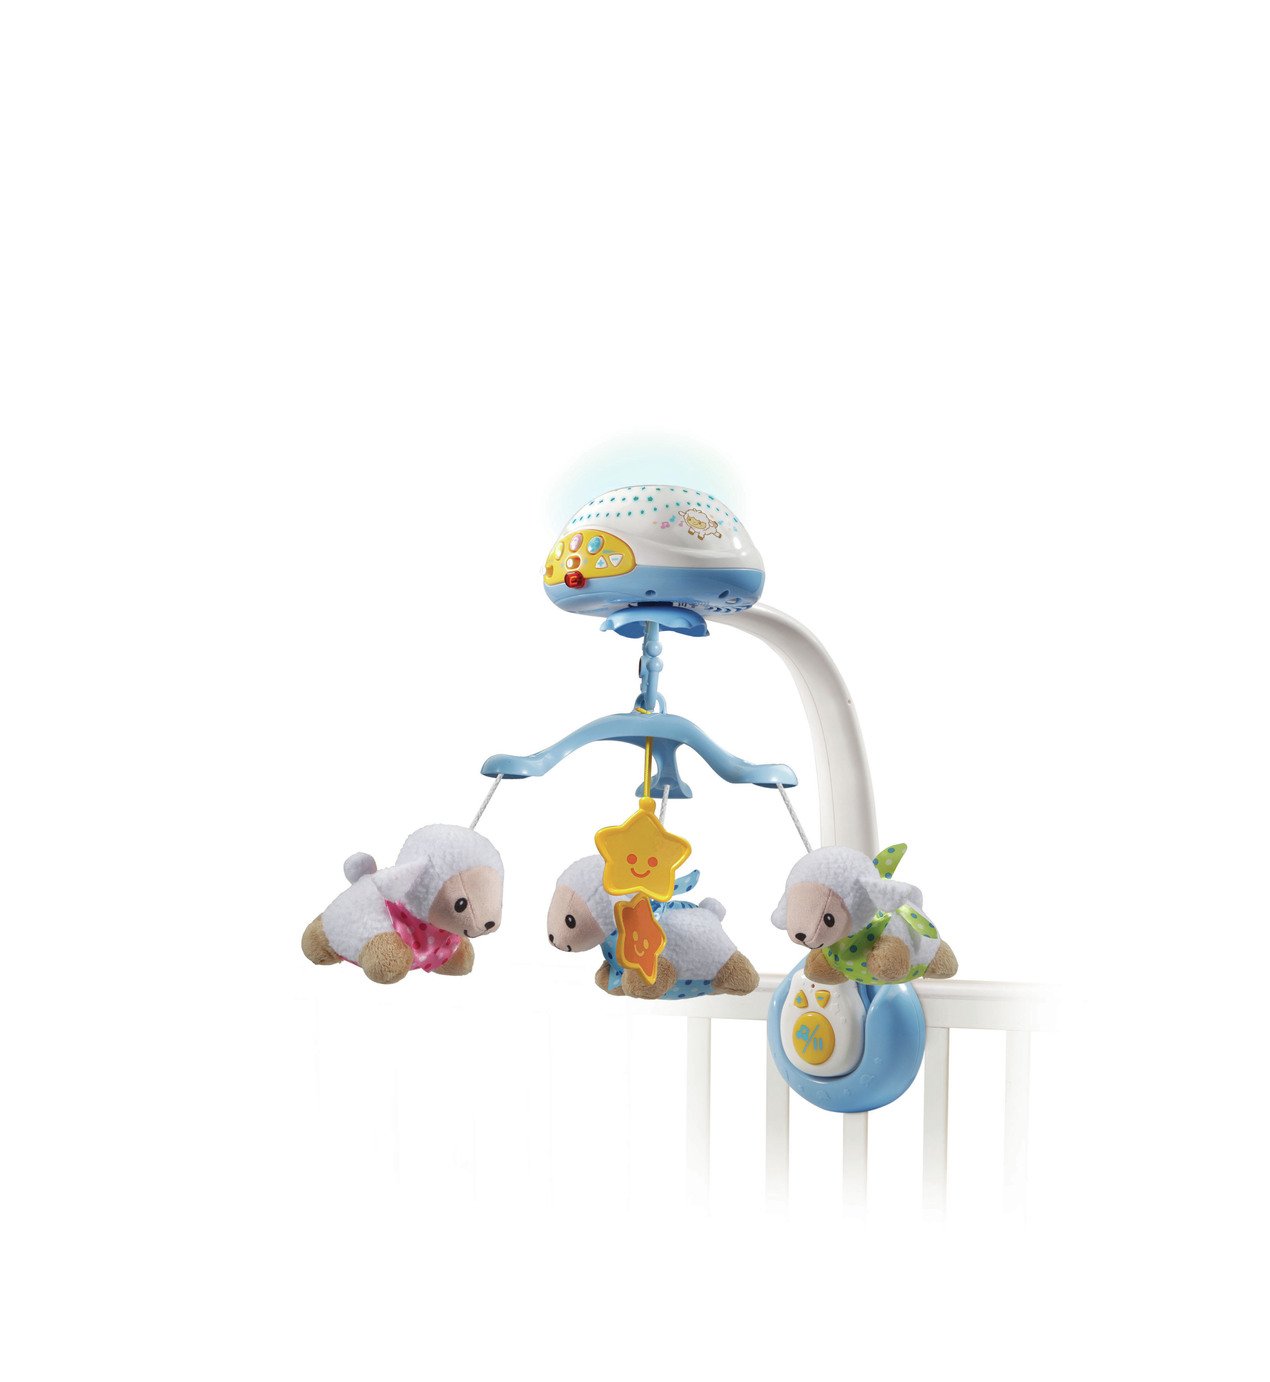 VTech Lullaby Lambs Cot Mobile Review